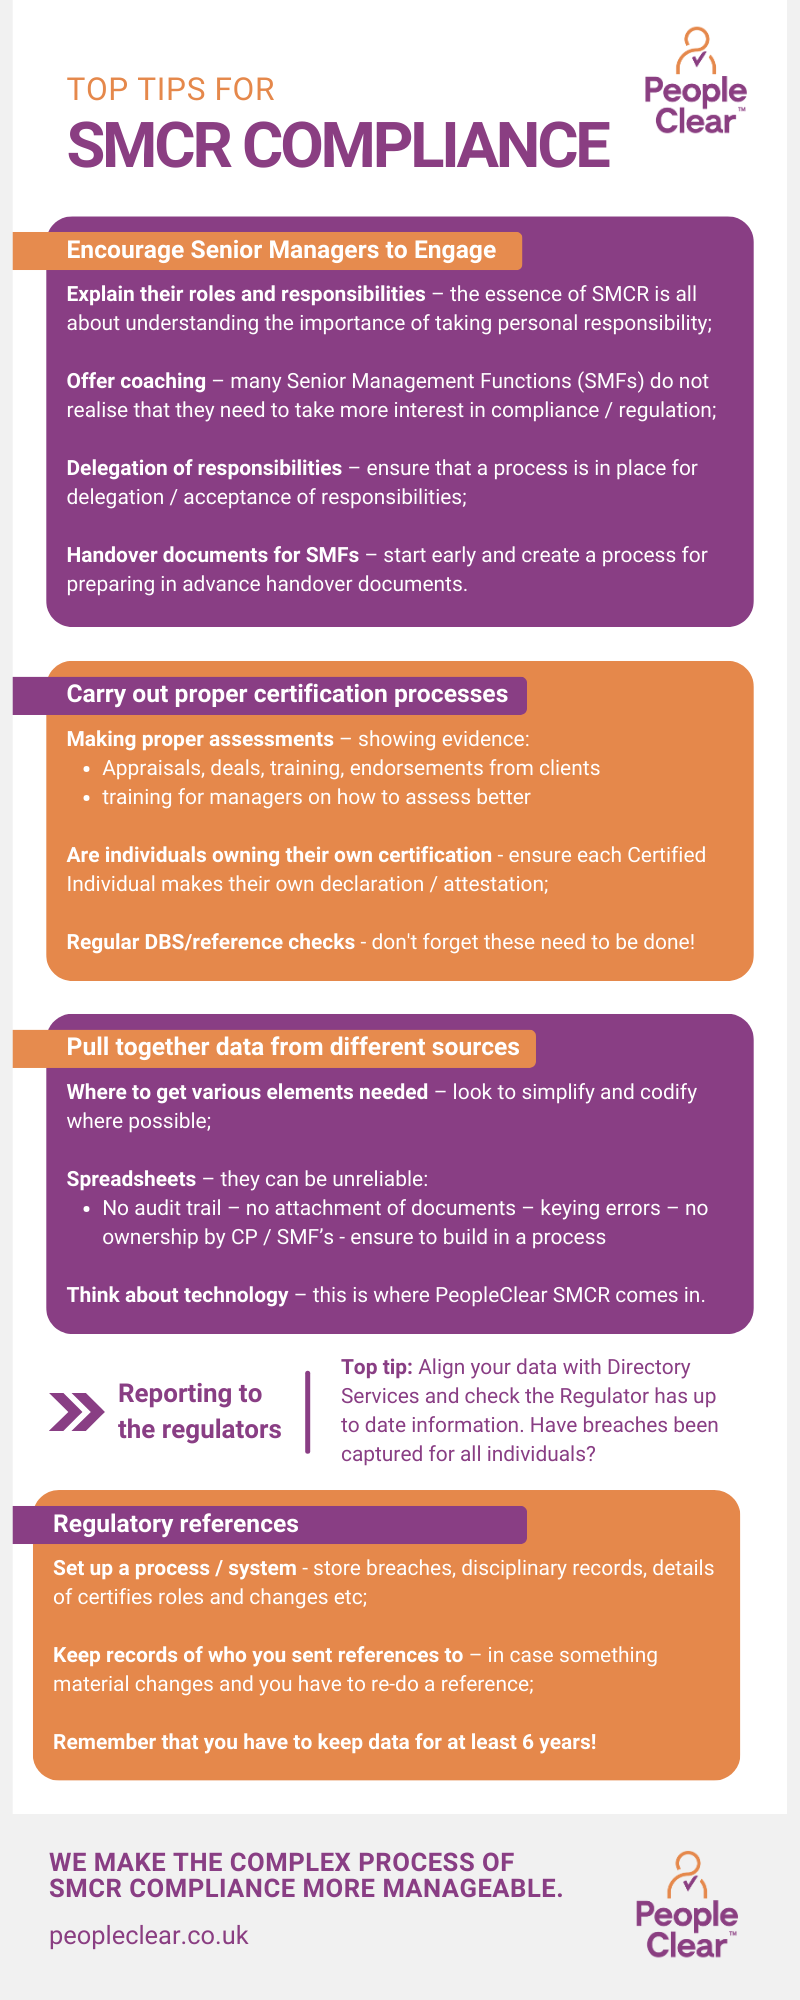 Top tips for SMCR Compliance - infographic from People Clear